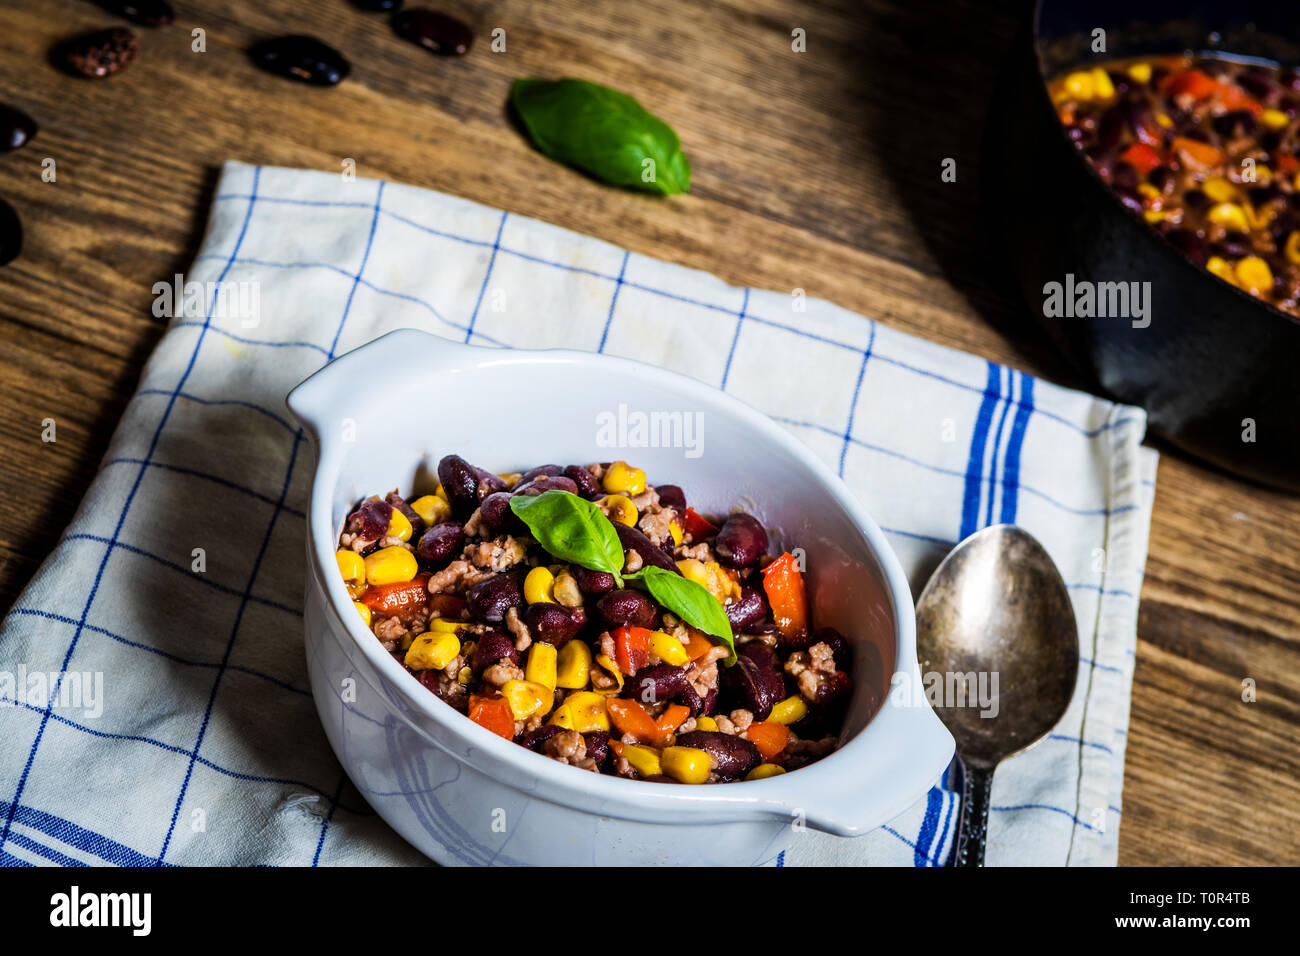 Chili or chilli corn carne. Cooked kidney bean, minced meat, chili, corn and pepper in white bowl  on wood table Stock Photo